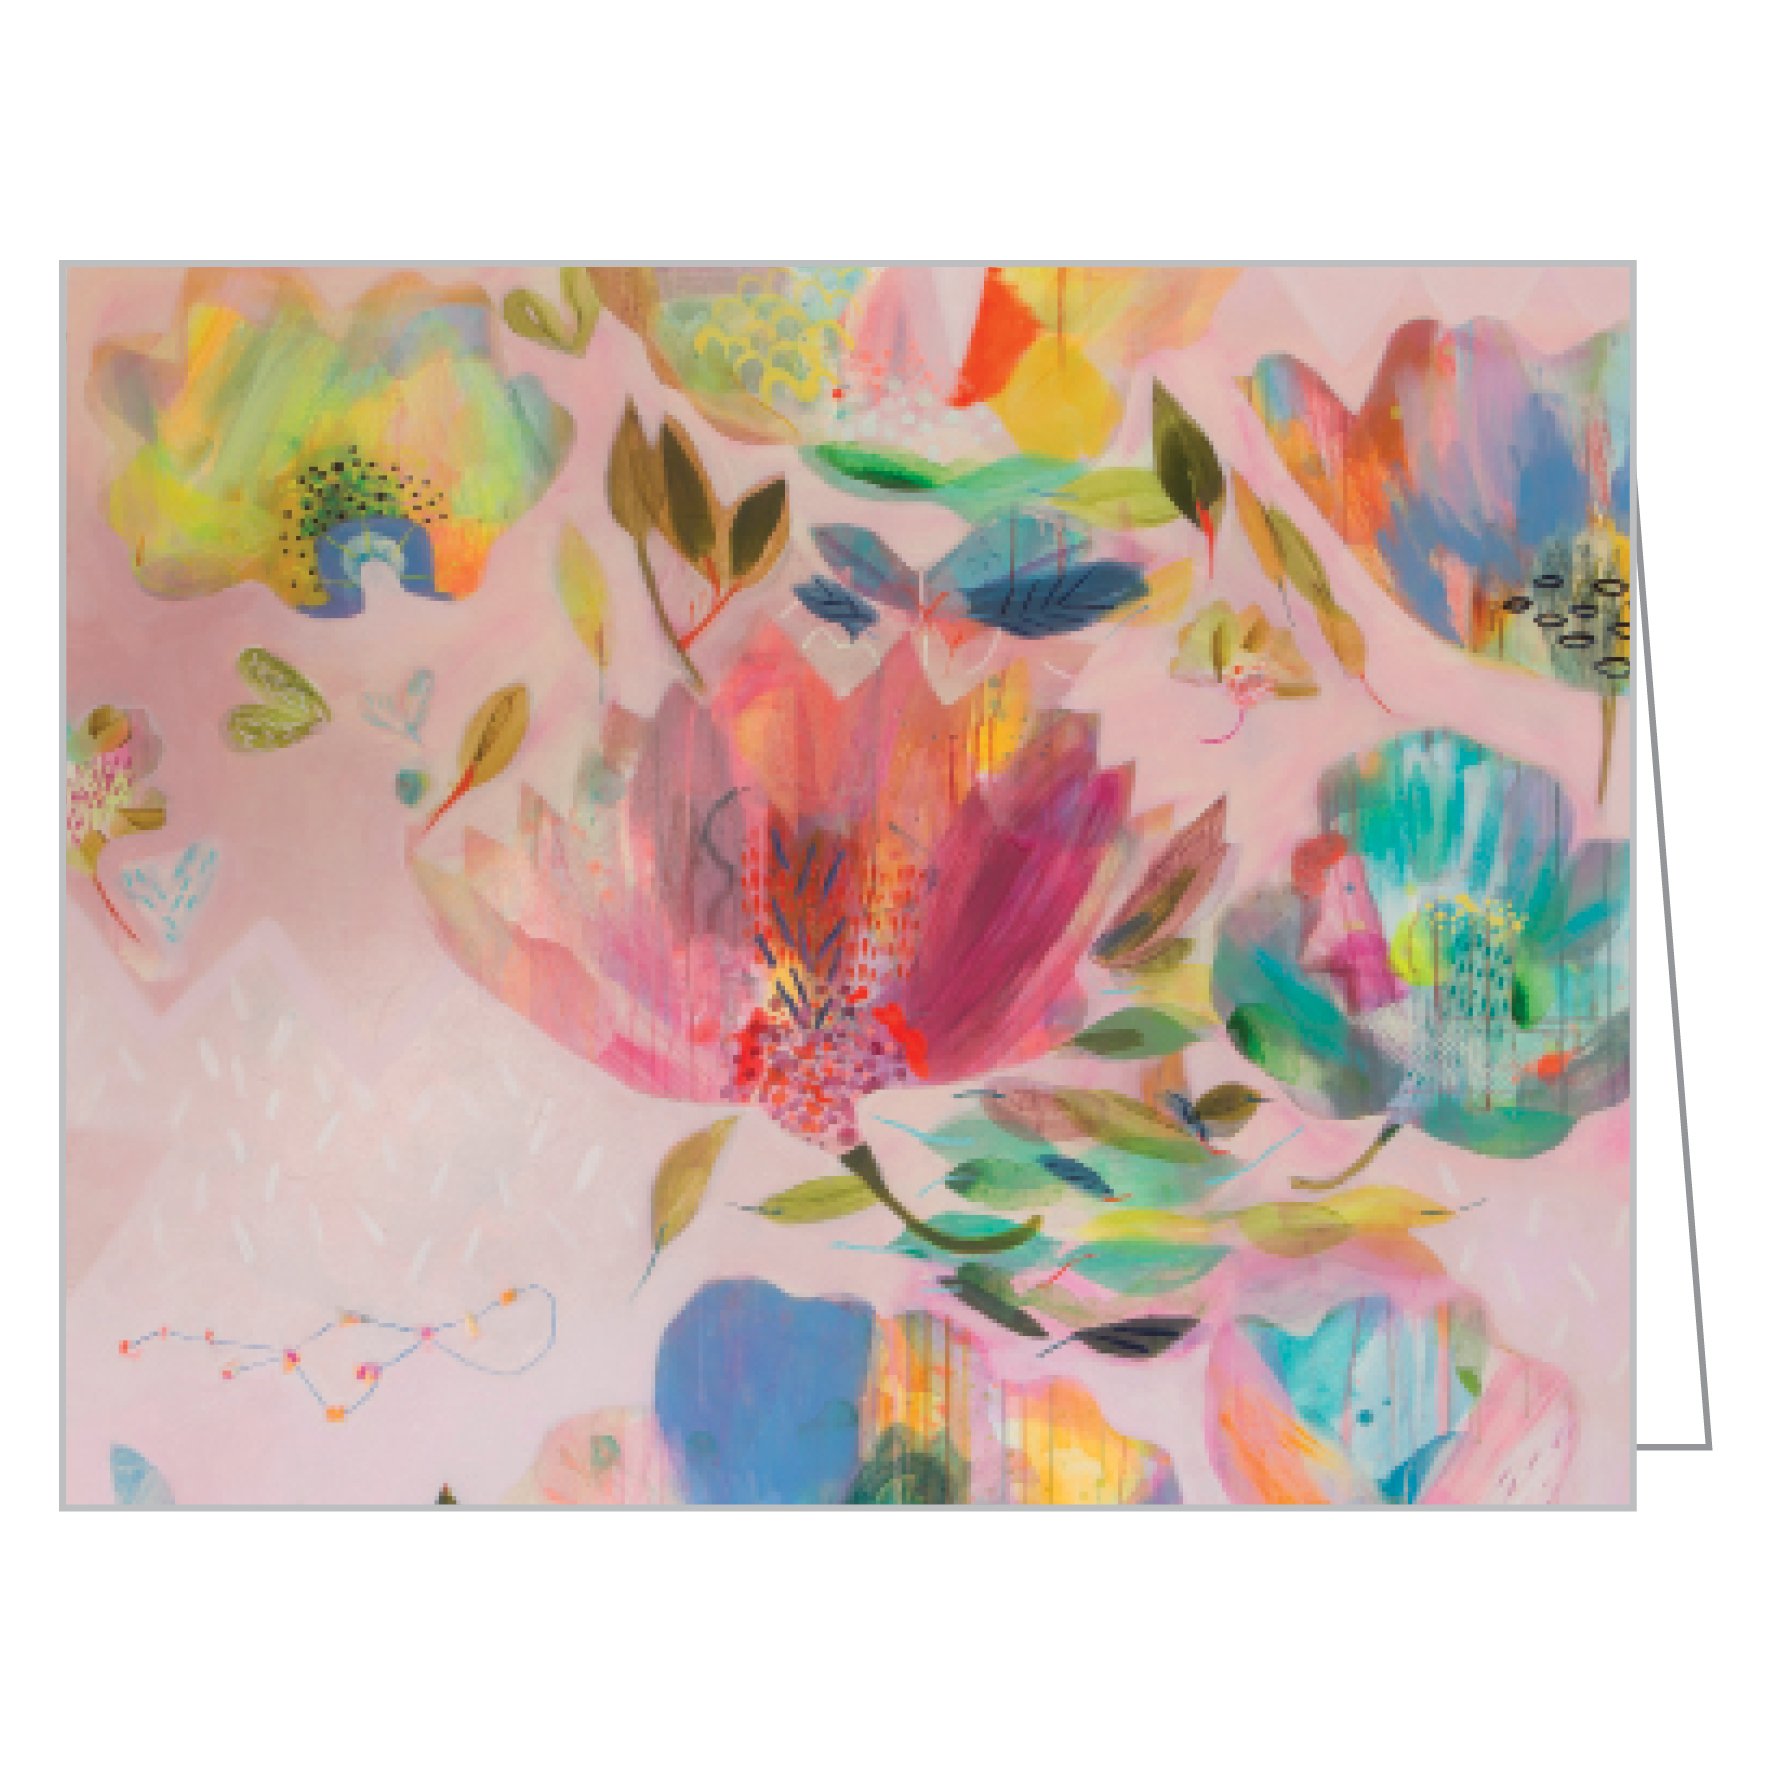 Floral painting 'Halcyon Garden' by Becky Blair, on notecard box, by teNeues stationery.